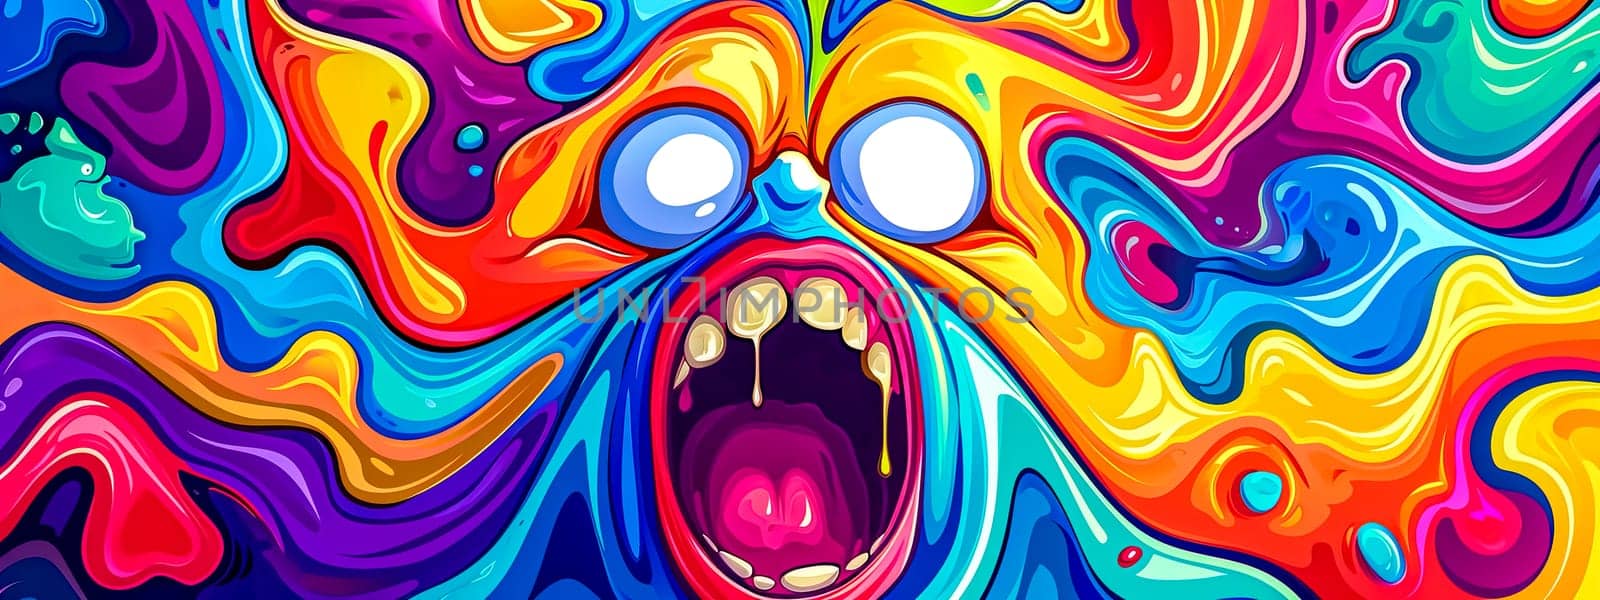 Abstract swirls of vivid colors with a cartoonish face in a state of shock or surprise